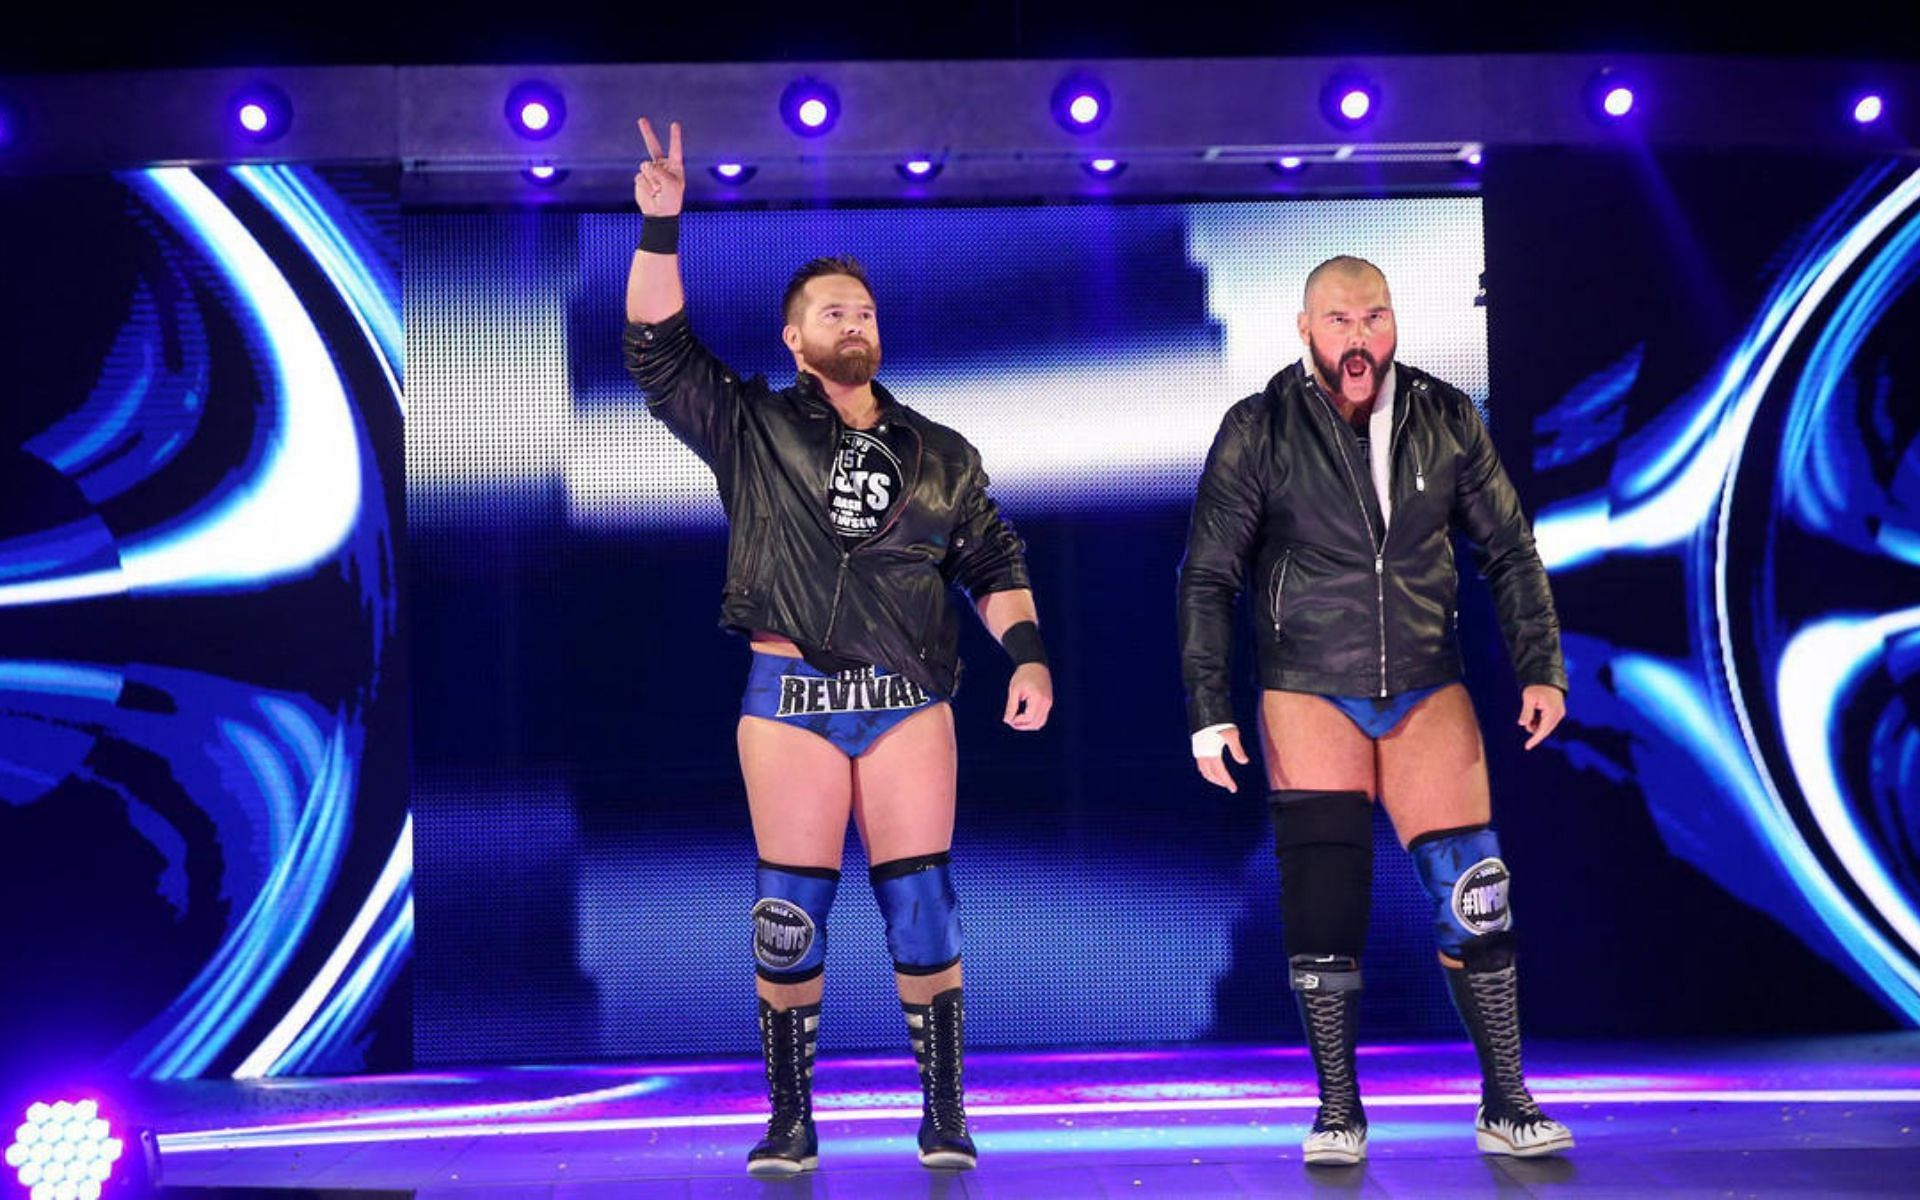 The Revival (FTR) is one of the hottest tag teams in the world!